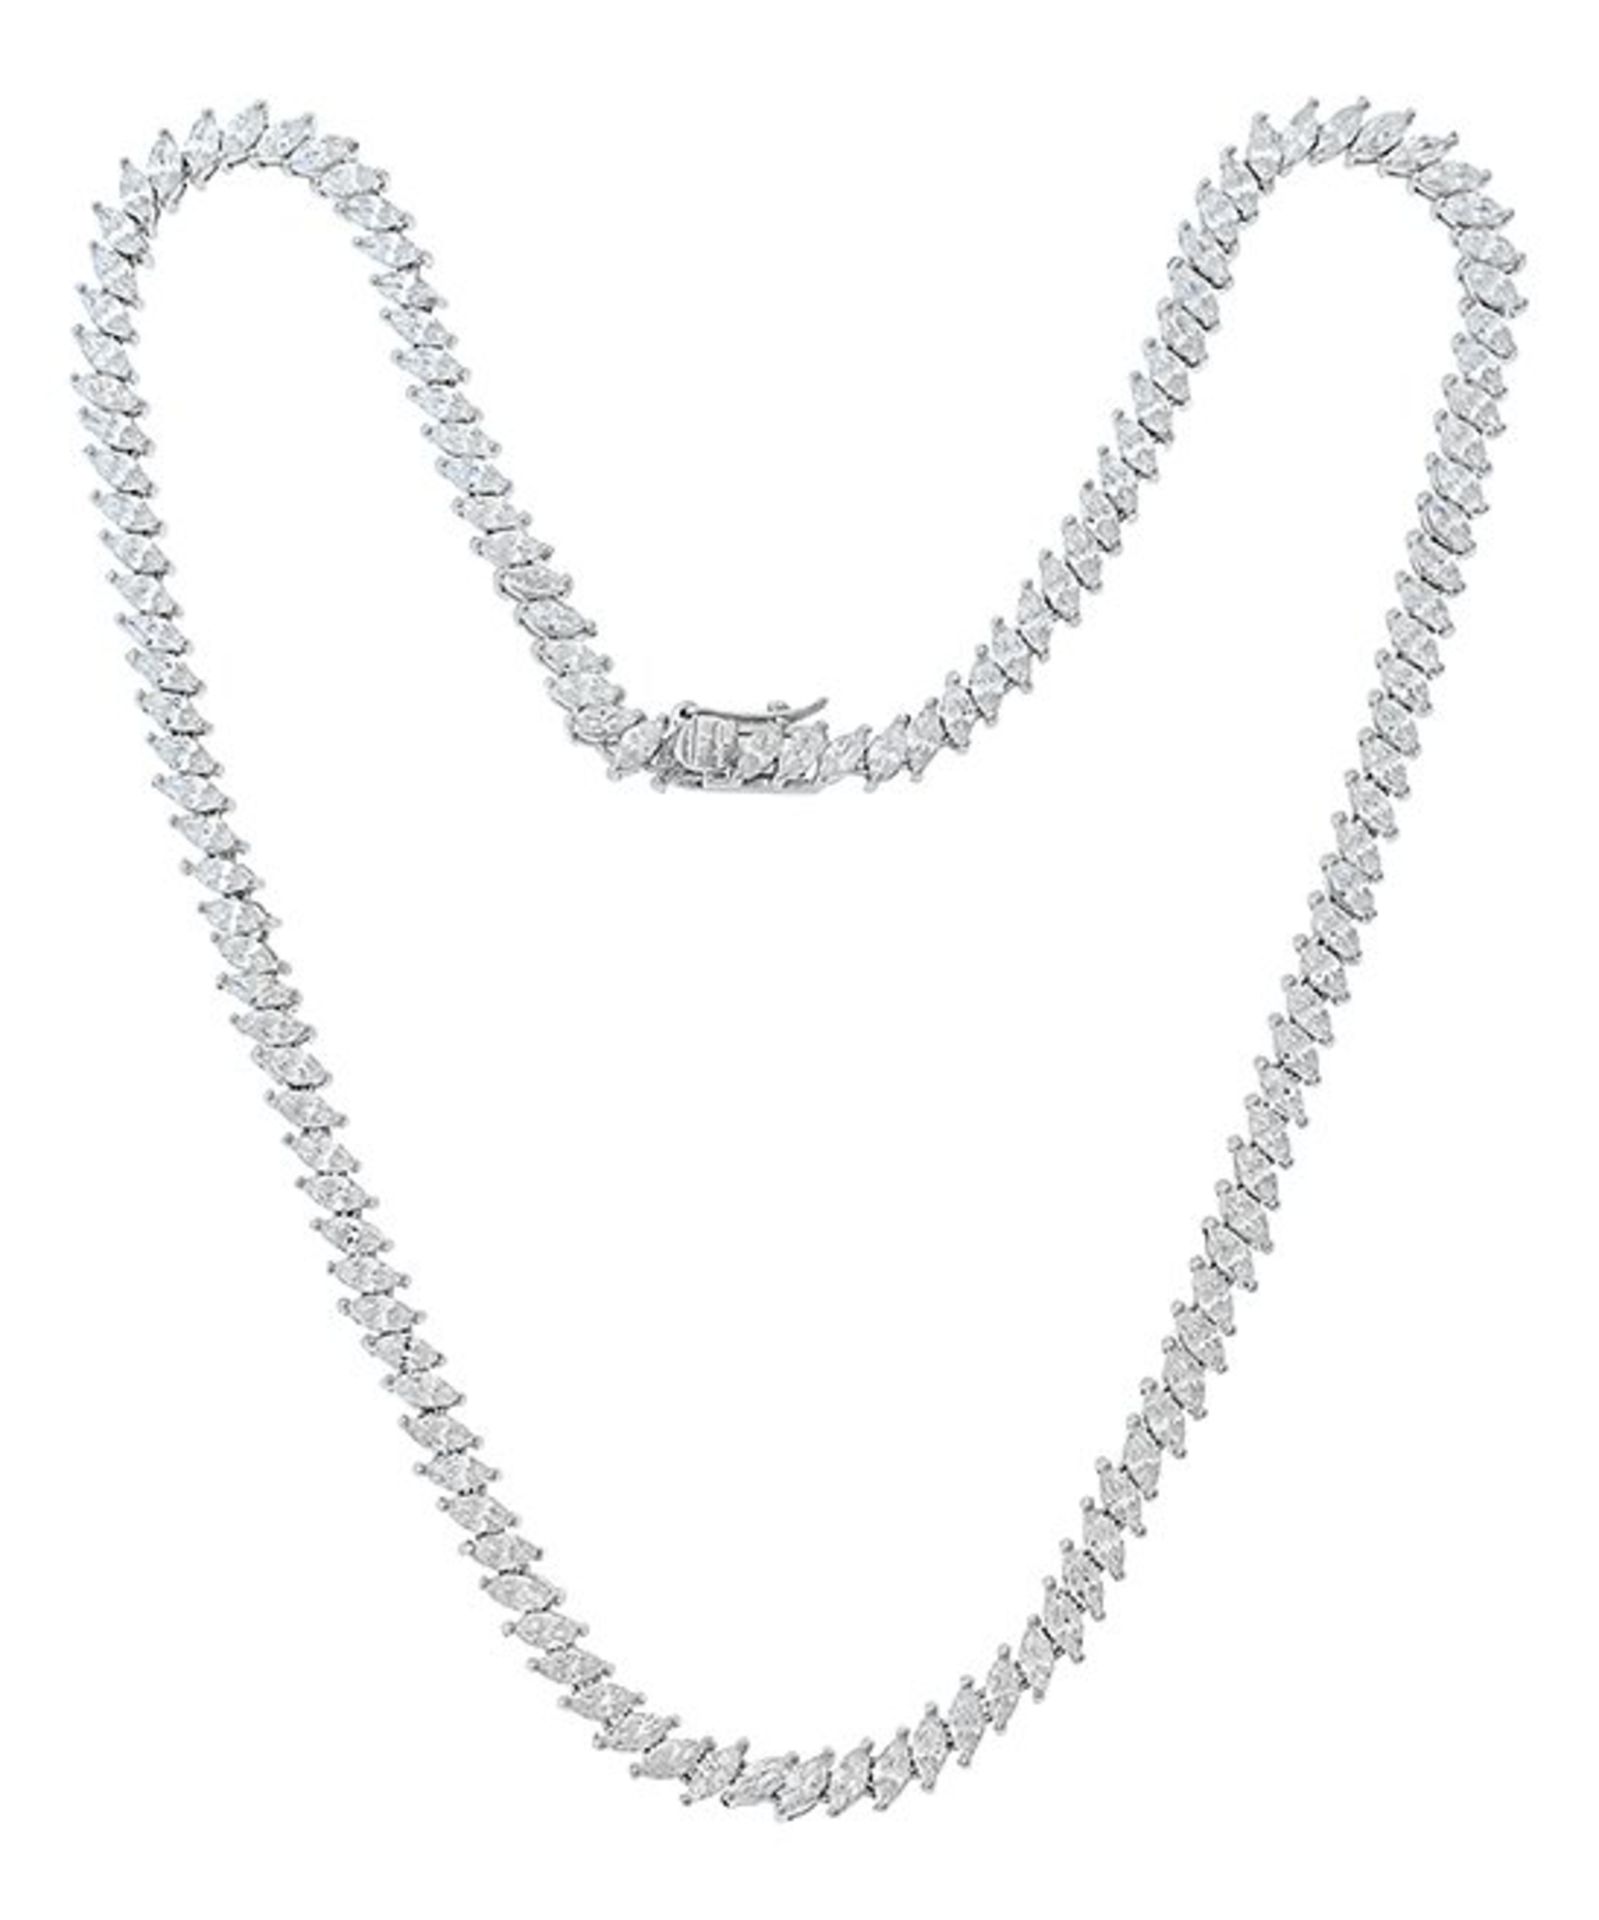 Golden Moon Marquise Silvertone Necklace With Swarovski® Crystals (New) [Ref: 51862736-T-25]